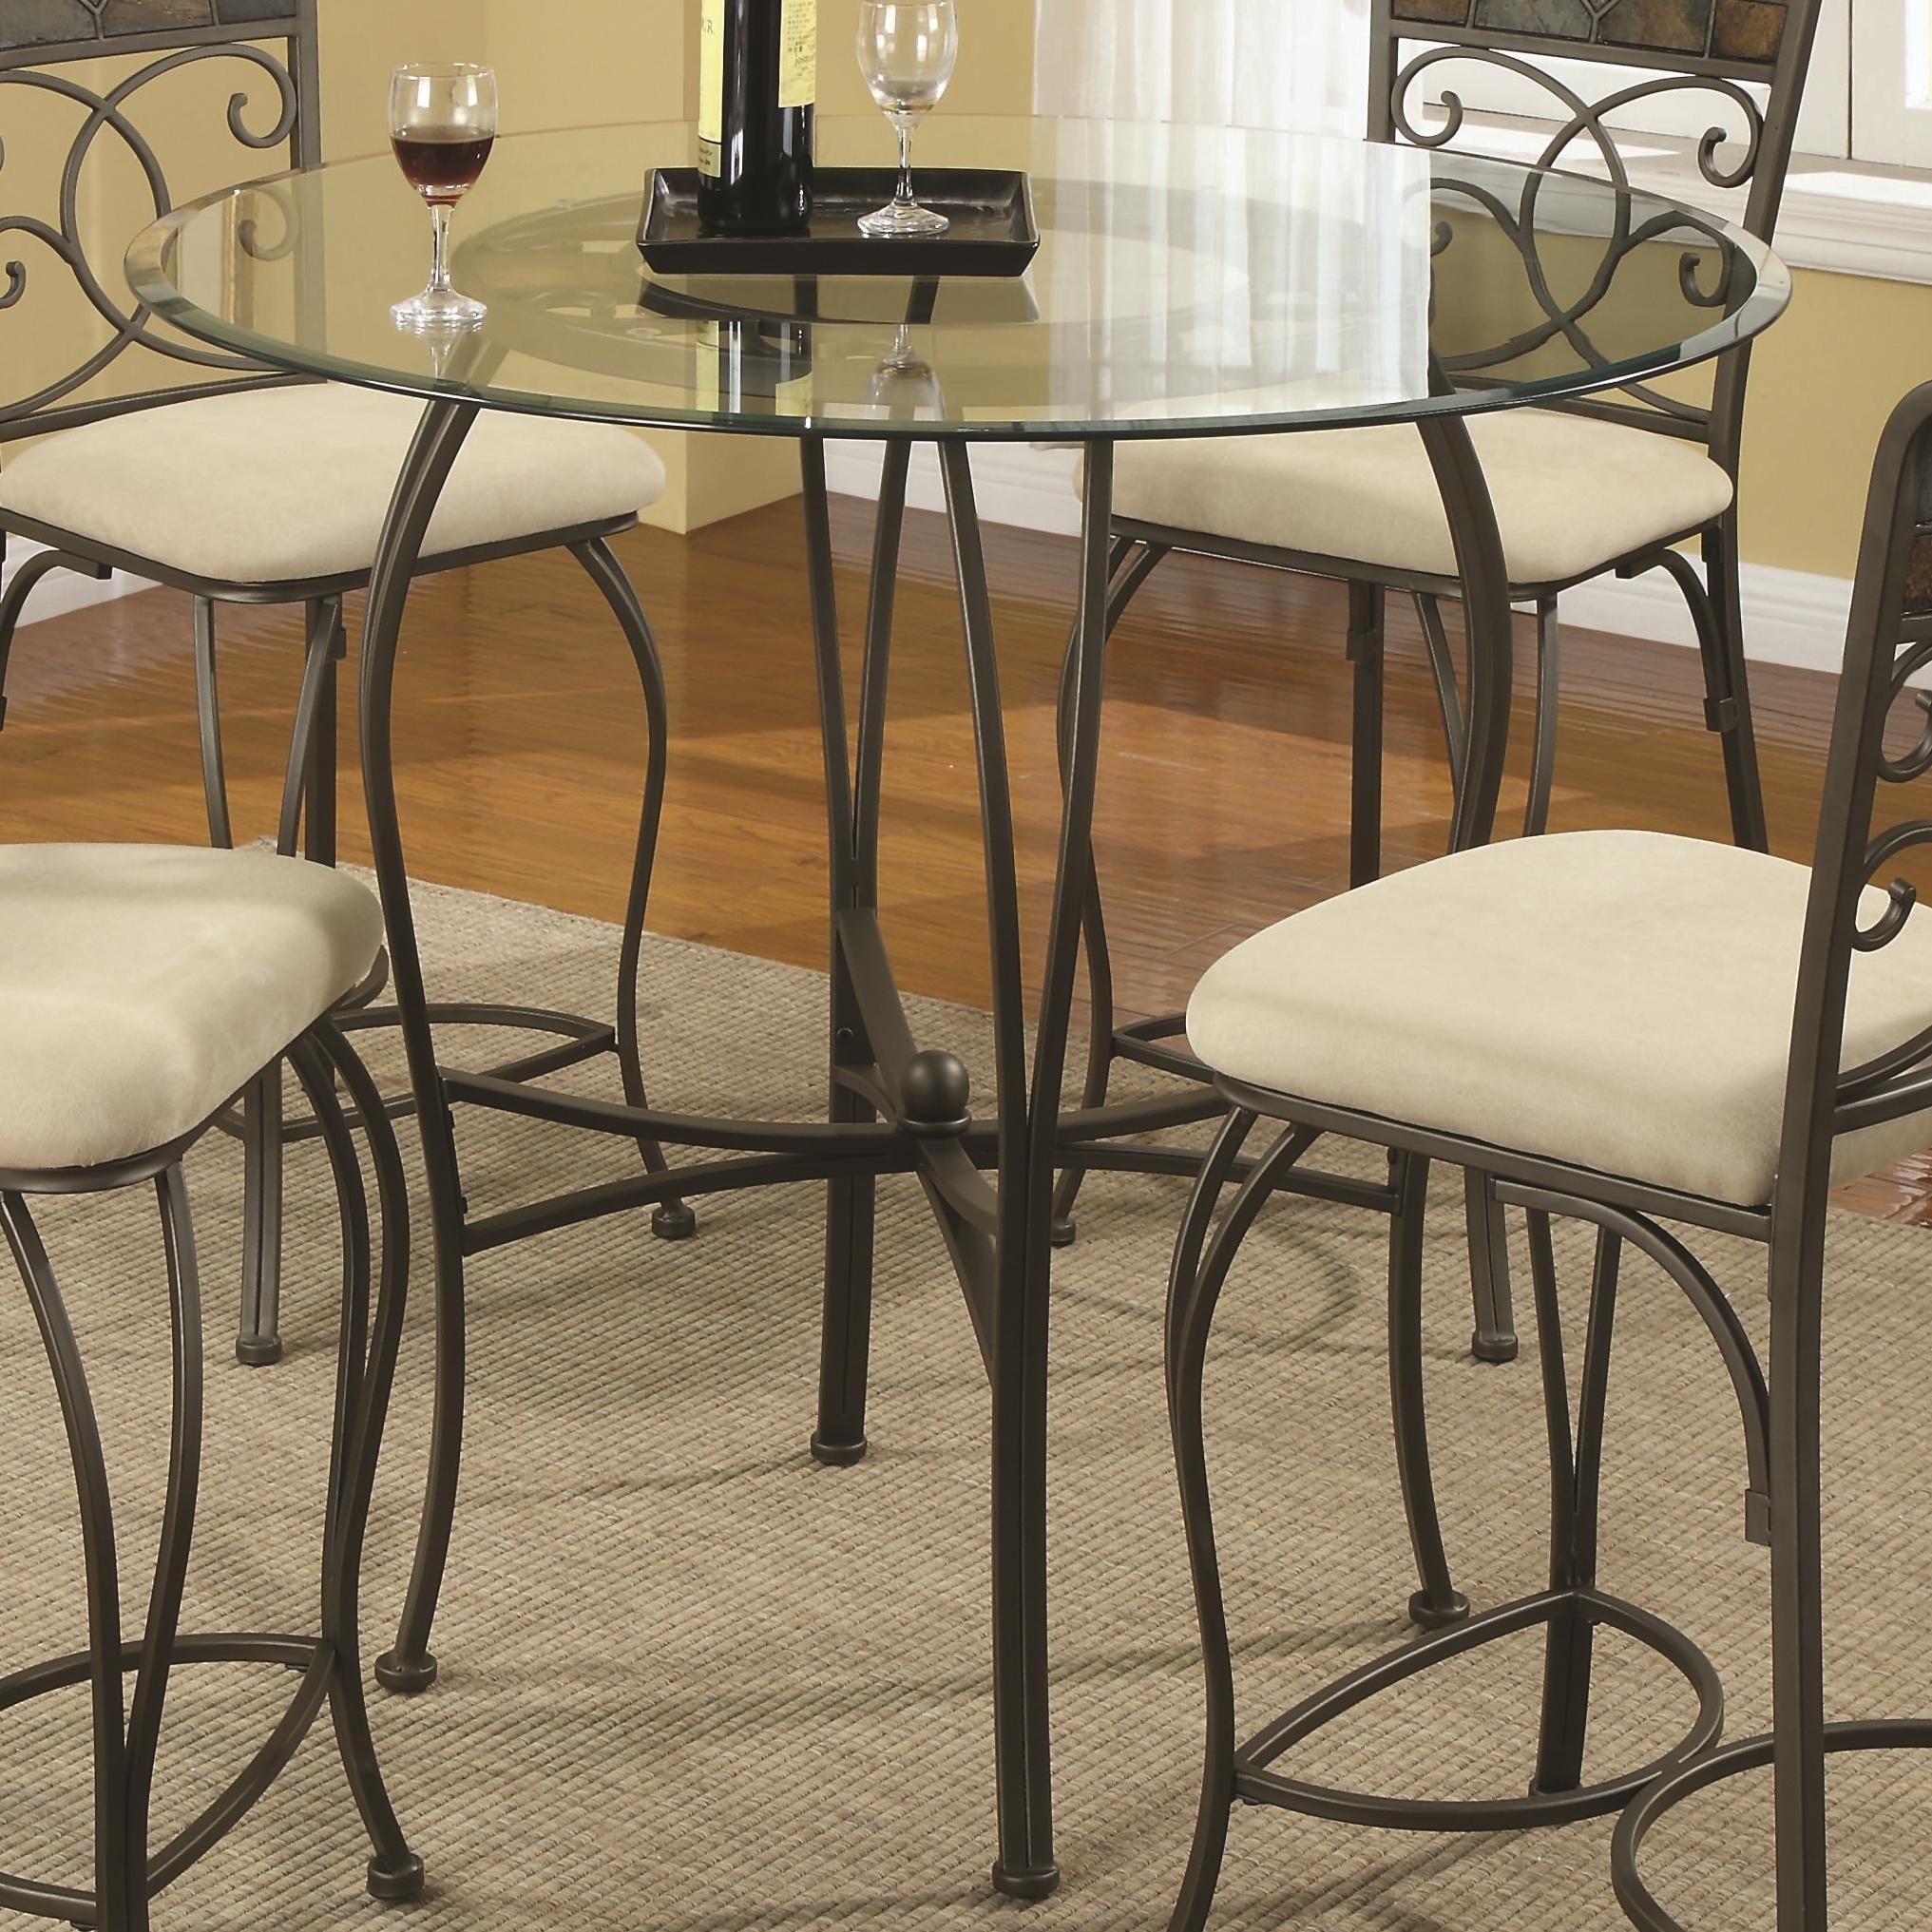 Glass metal dining sets